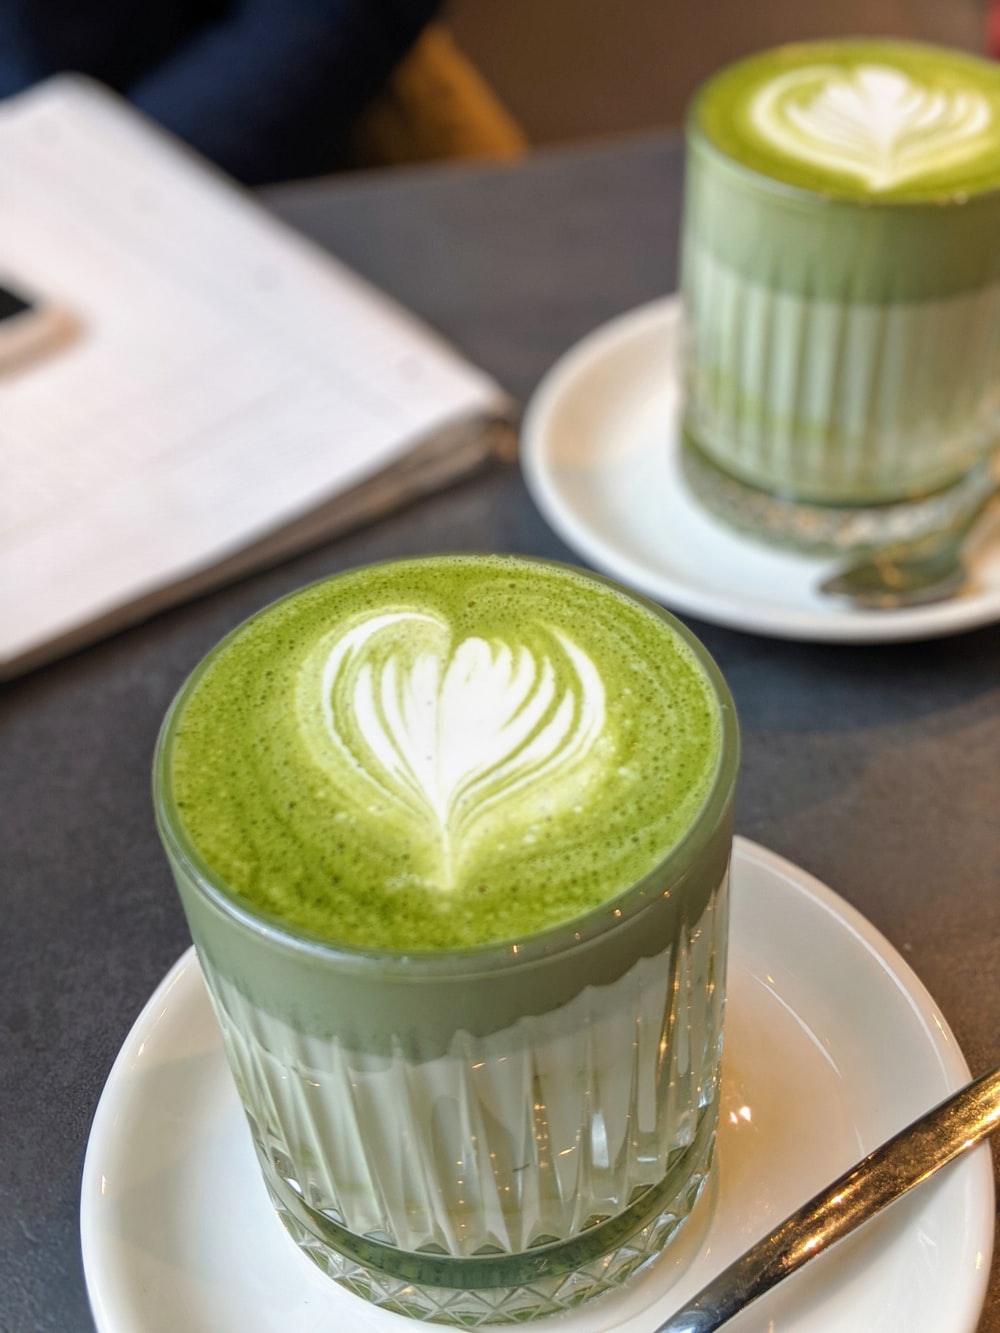 Matcha Picture. Download Free Image